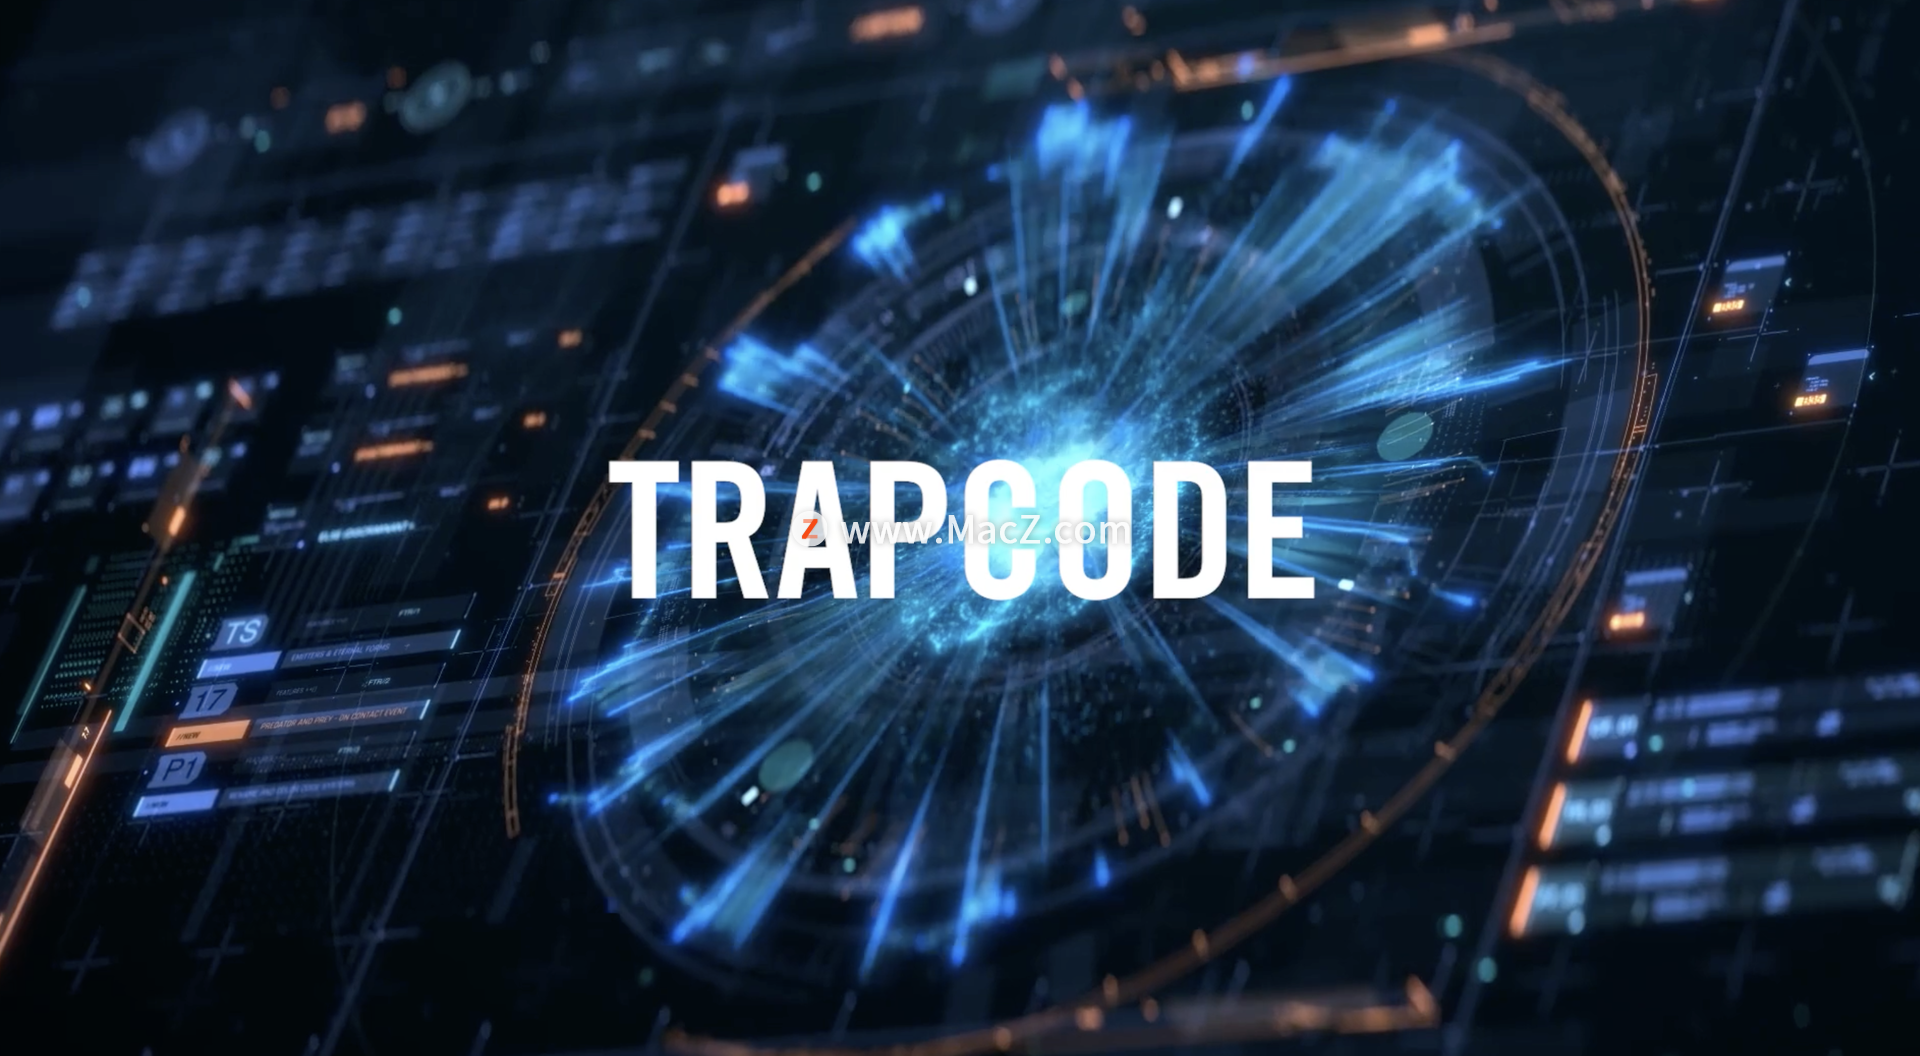 Macos 红巨星粒子插件：Red Giant Trapcode Suite Mac破解版